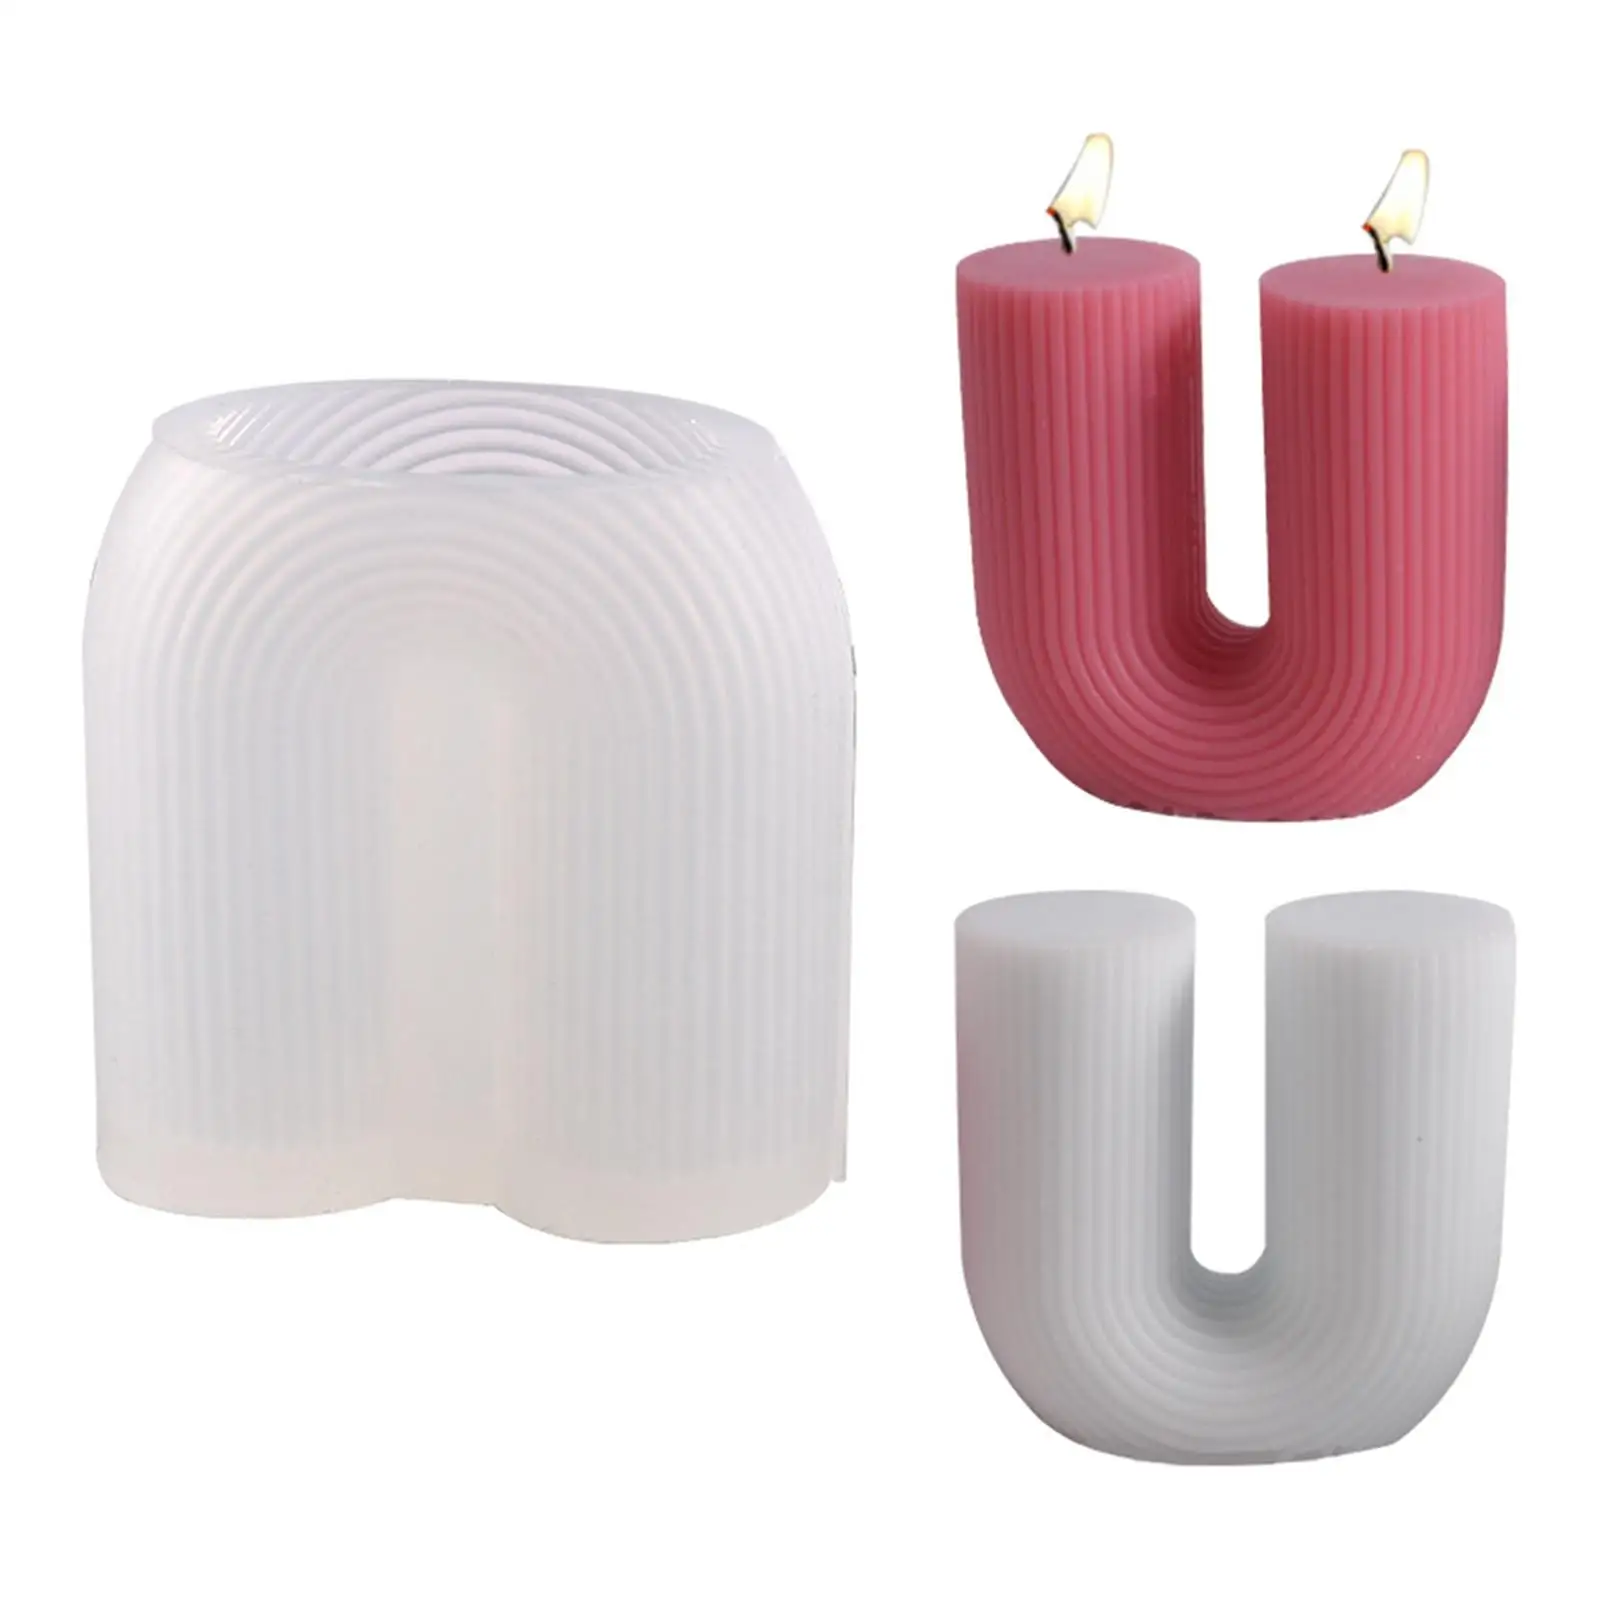 Durable Silicone Candle Casting wax making for Wedding Home Valentine